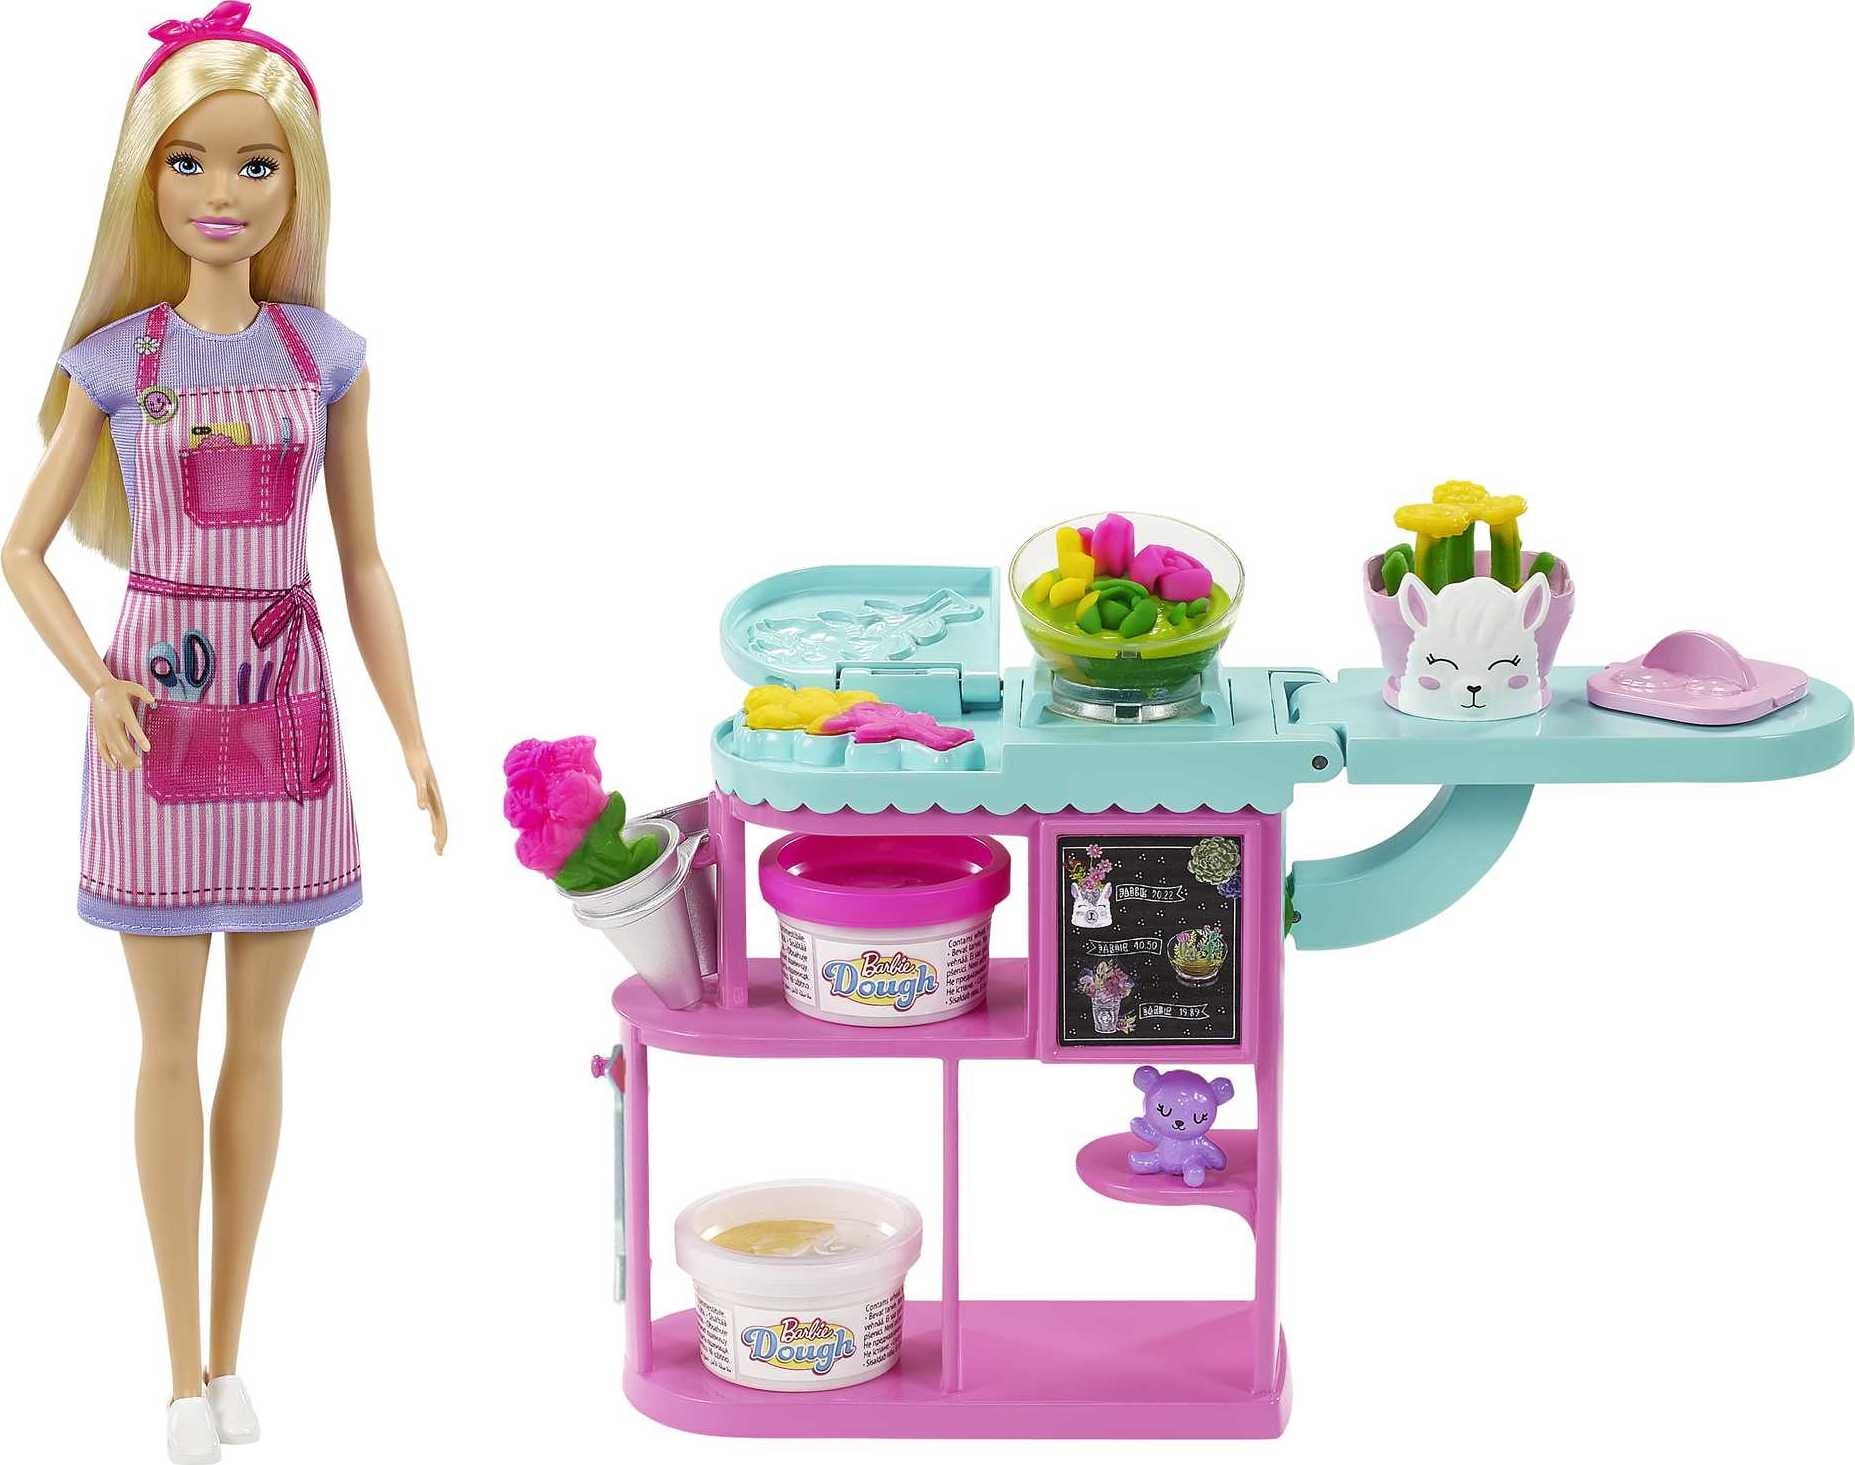 Barbie Florist Doll Playset with Flower-Making Station, Molds, Dough & Accessories, Doll - Walmart.com